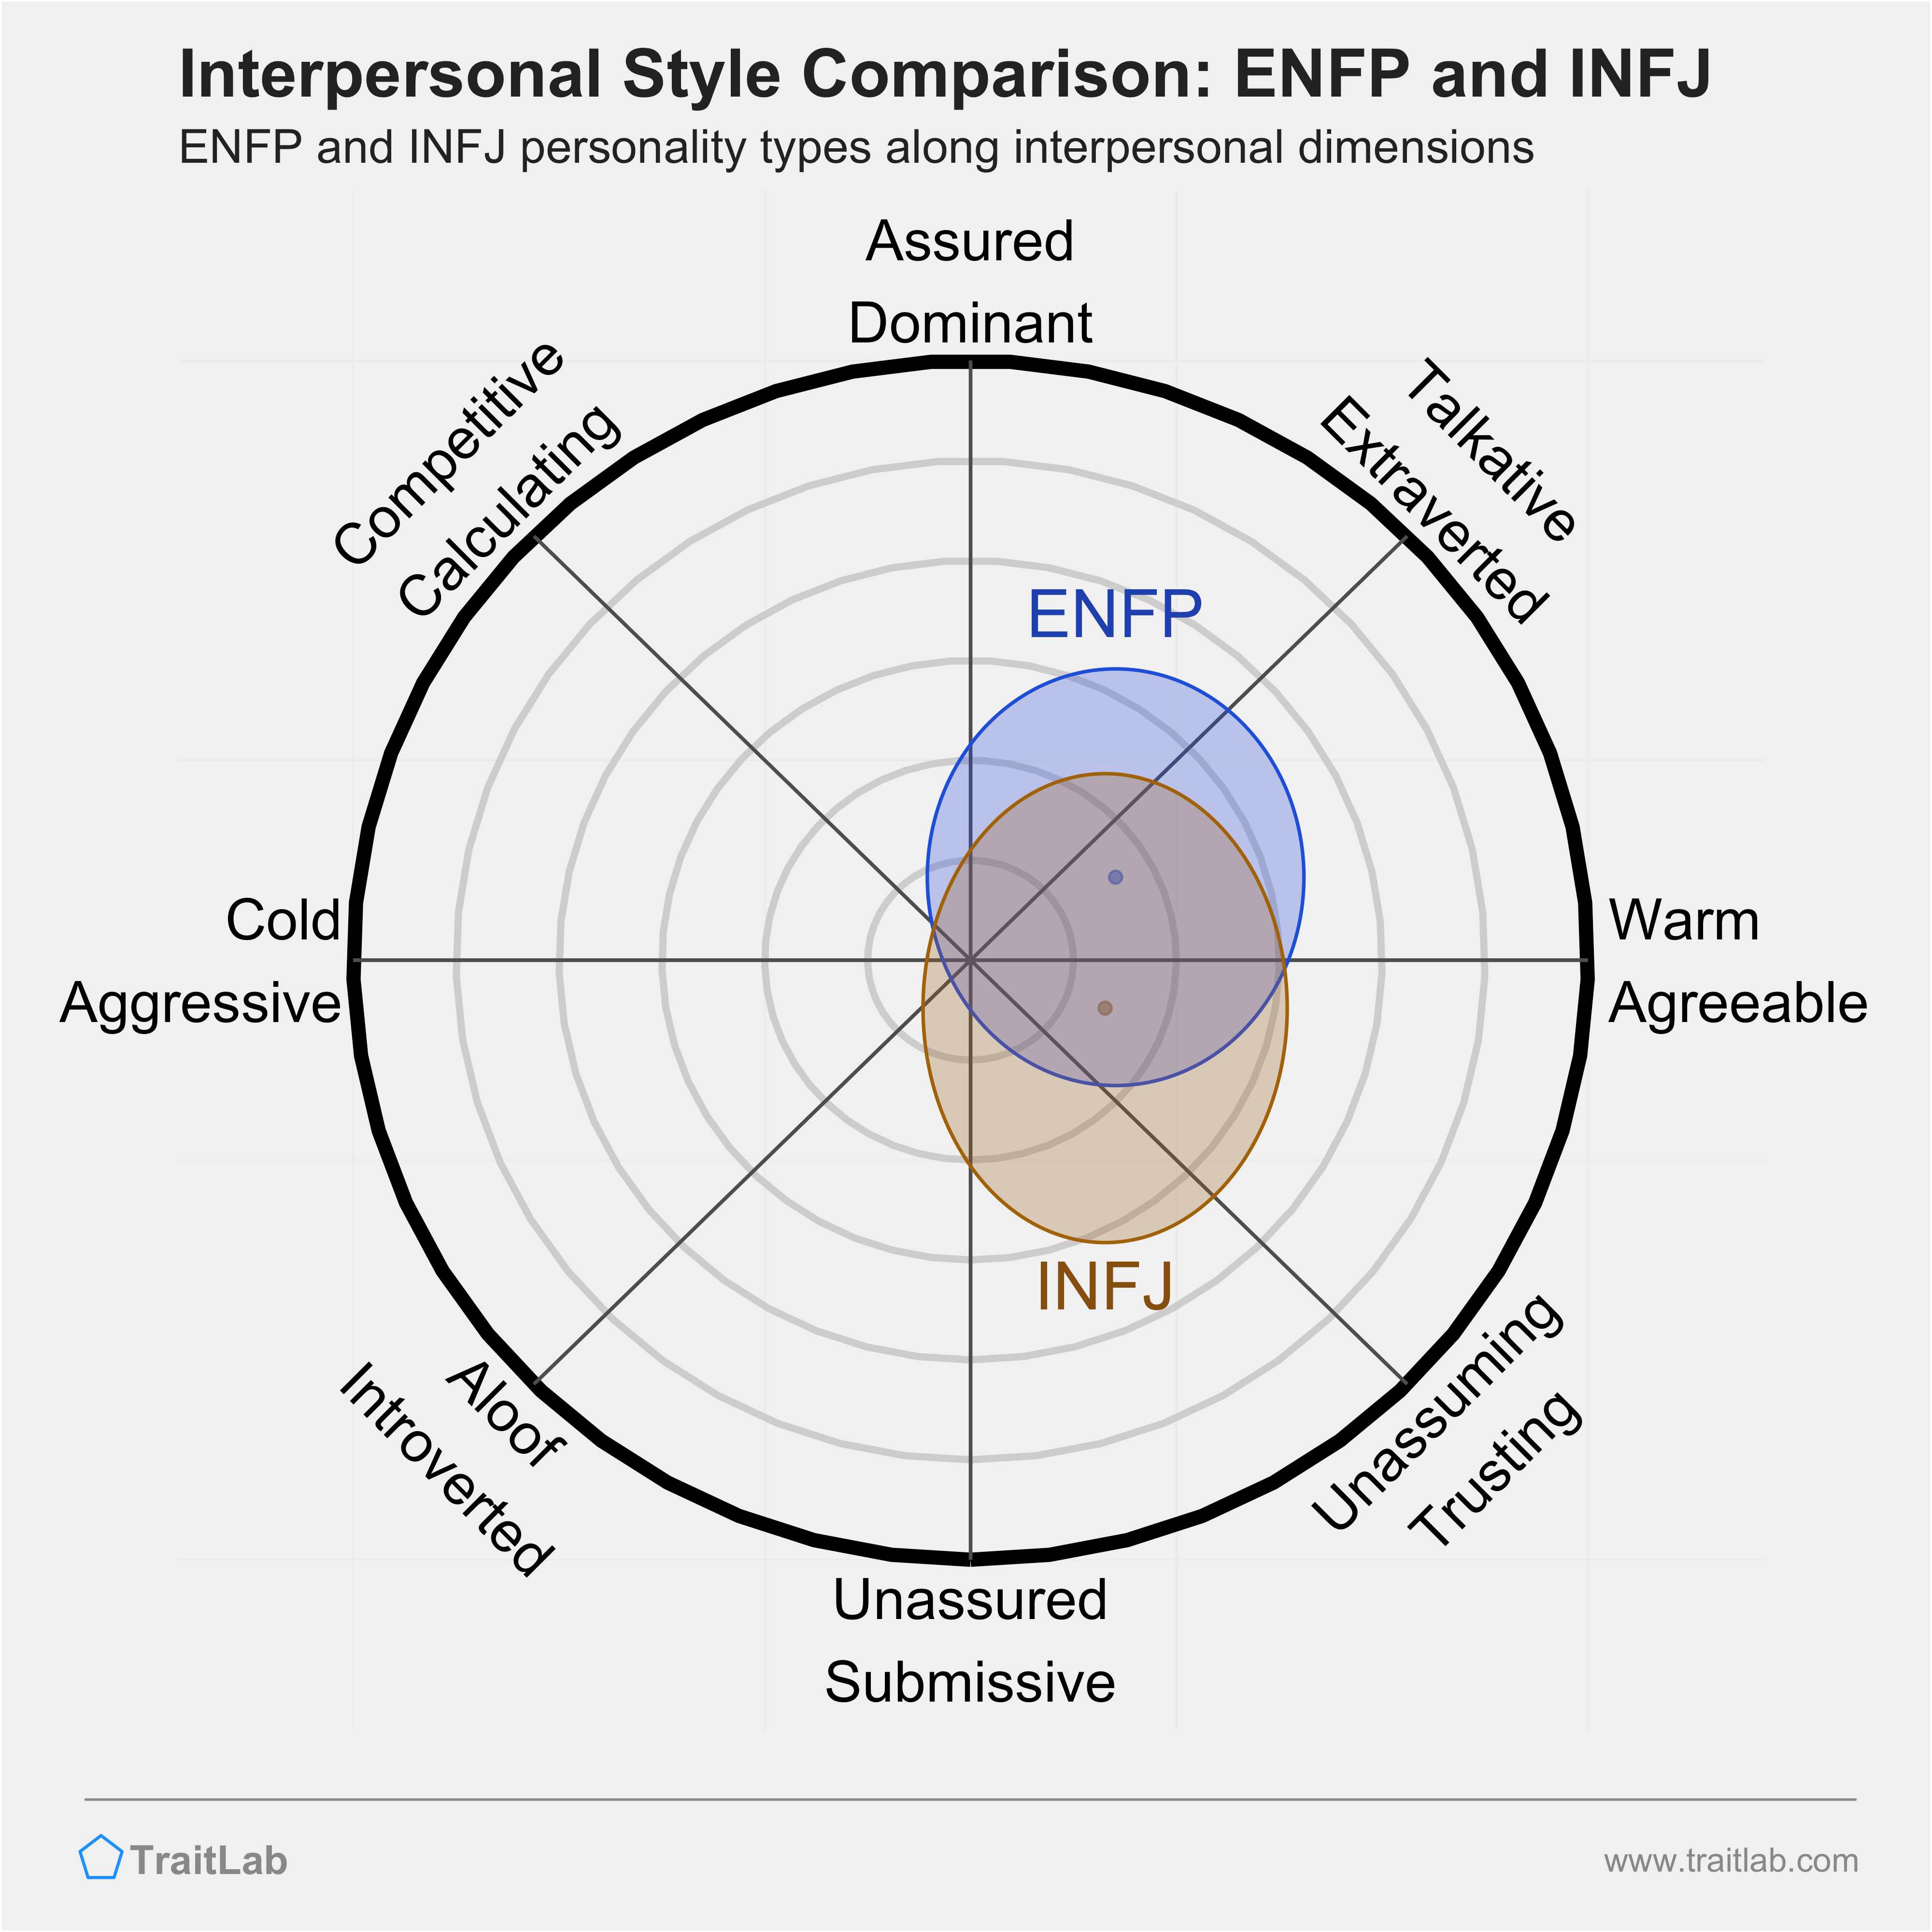 ENFP and INFJ comparison across interpersonal dimensions